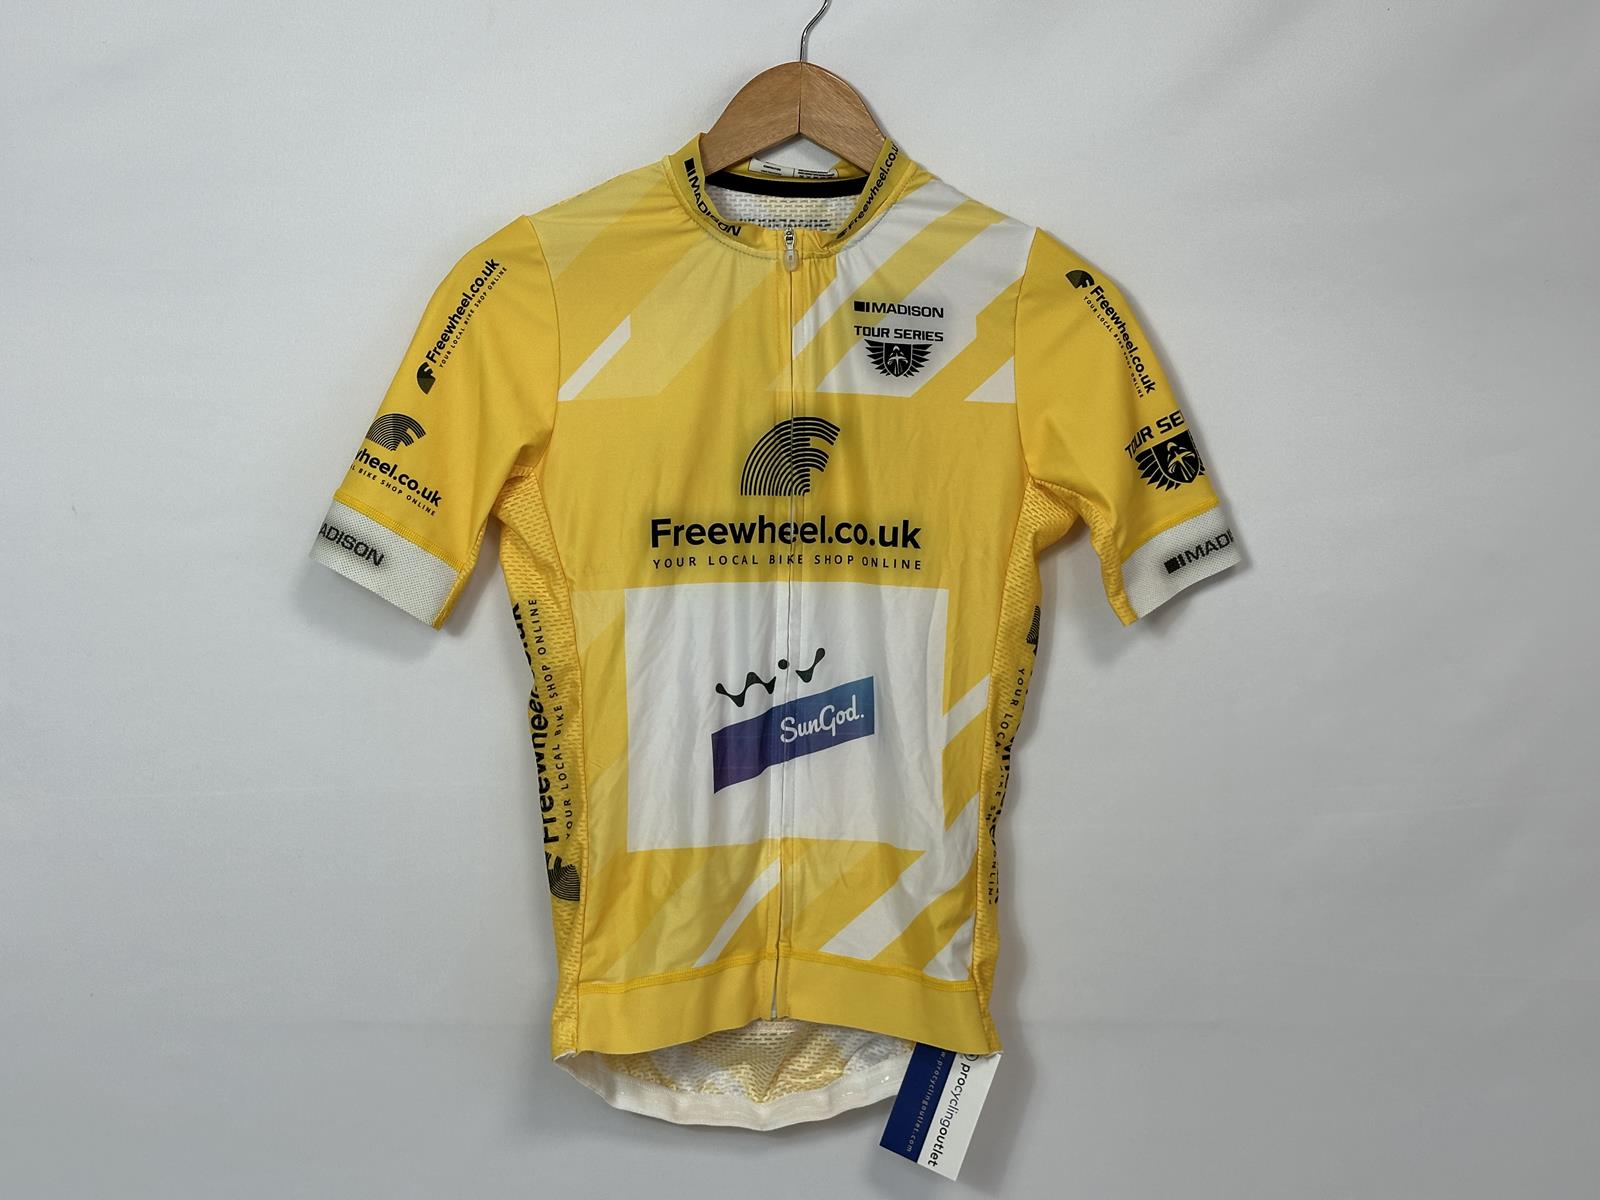 Team SunGod - S/S Team Jersey by Madison